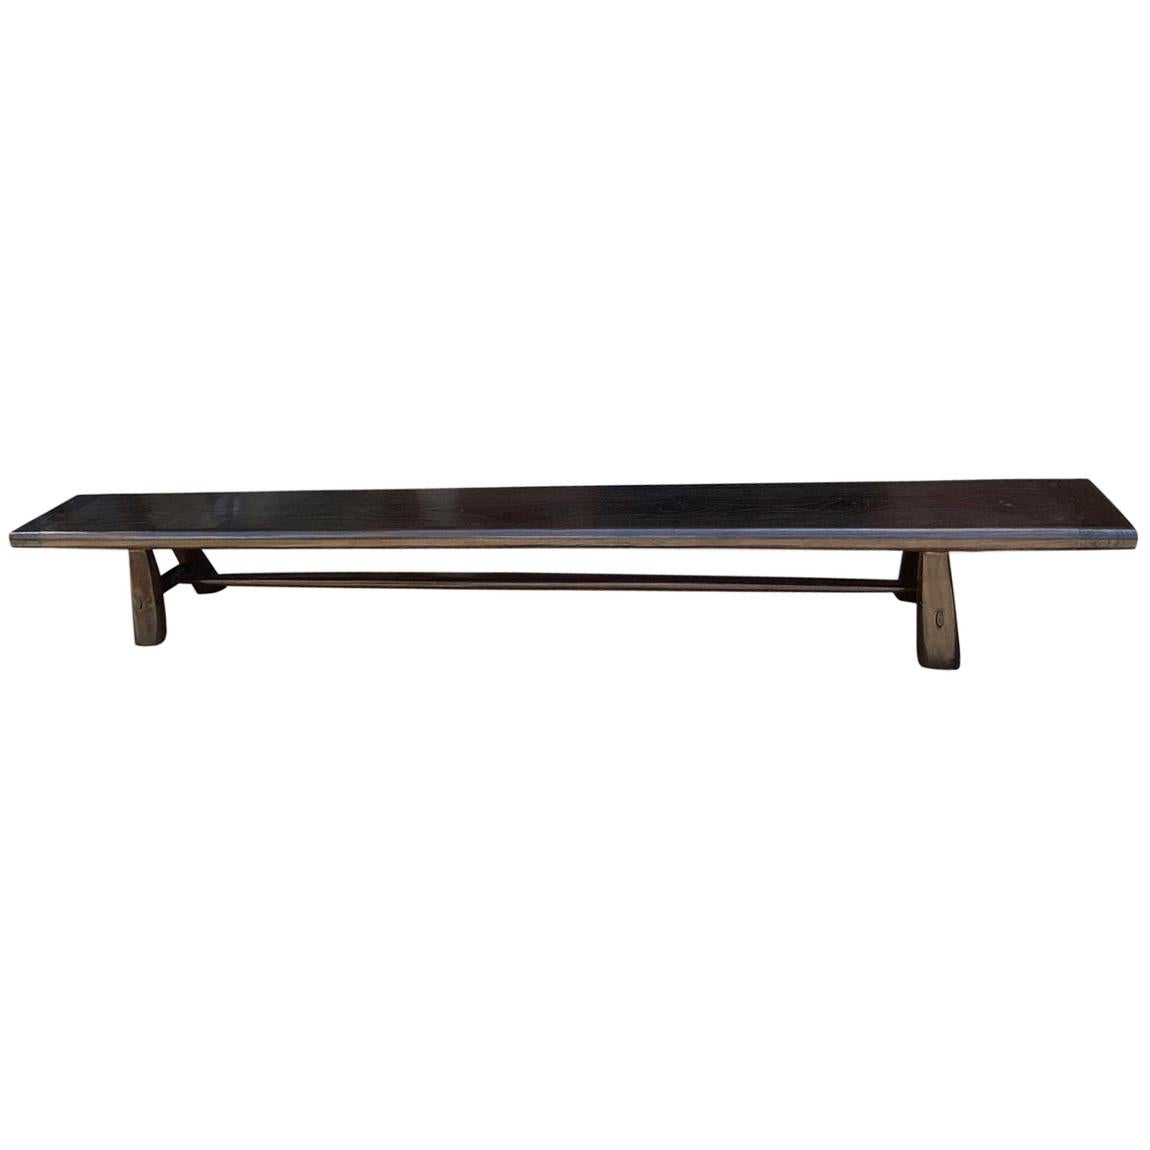 Andrianna Shamaris Midcentury Couture Espresso Stained Teak Wood Long Bench For Sale